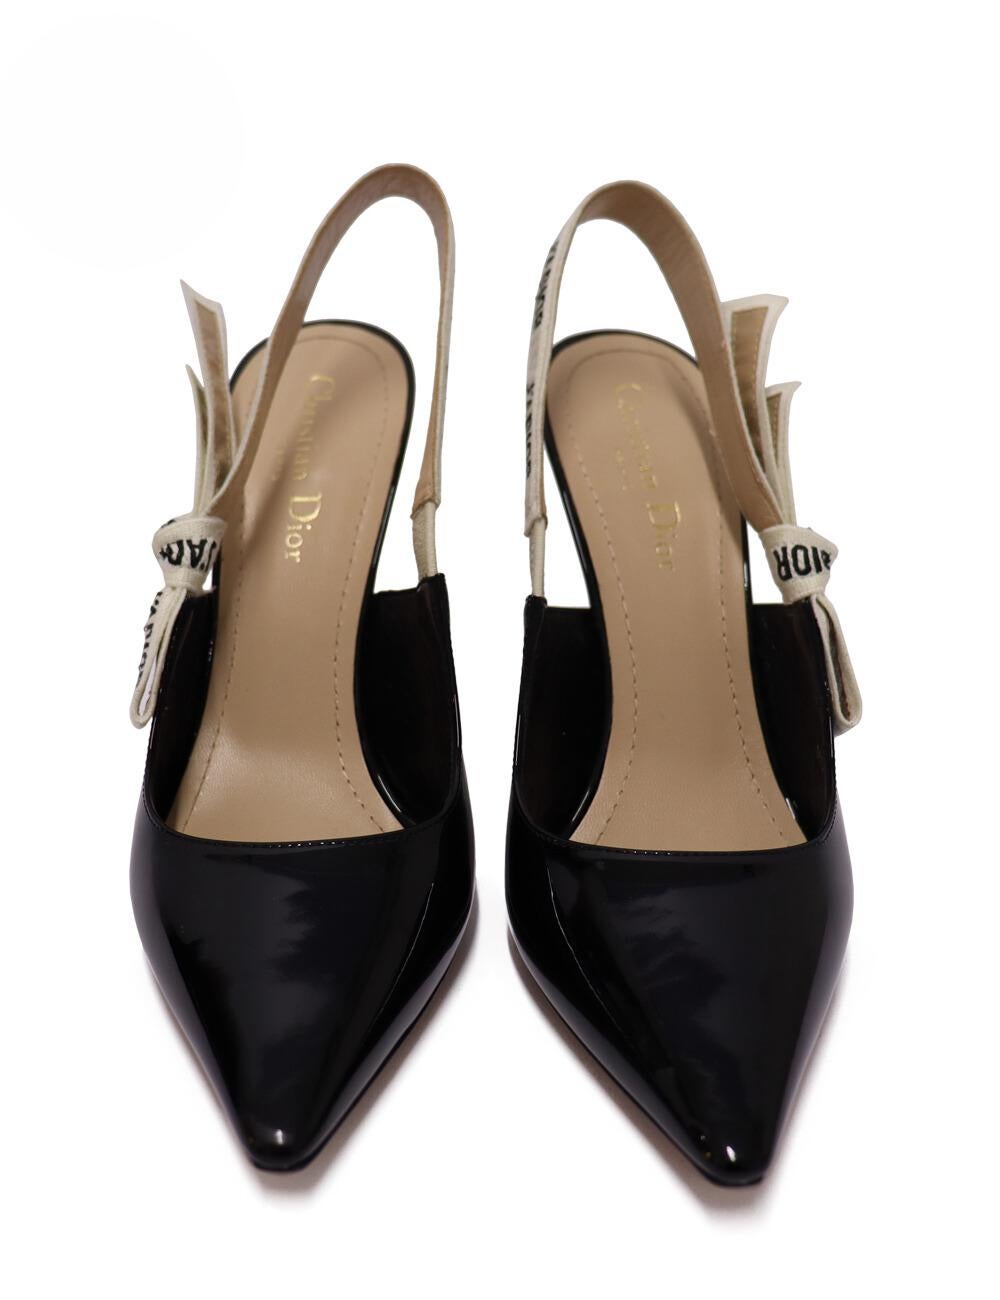 Christian Dior J'adior Slingback Pump in Black Patent Leather, with a two-tone embroidered 'J'ADIOR' ribbon embellished with a flat bow.

Material: Leather.
Size: EU 39.5
Heel Height: 10cm
Condition: New.
*Includes Original Box